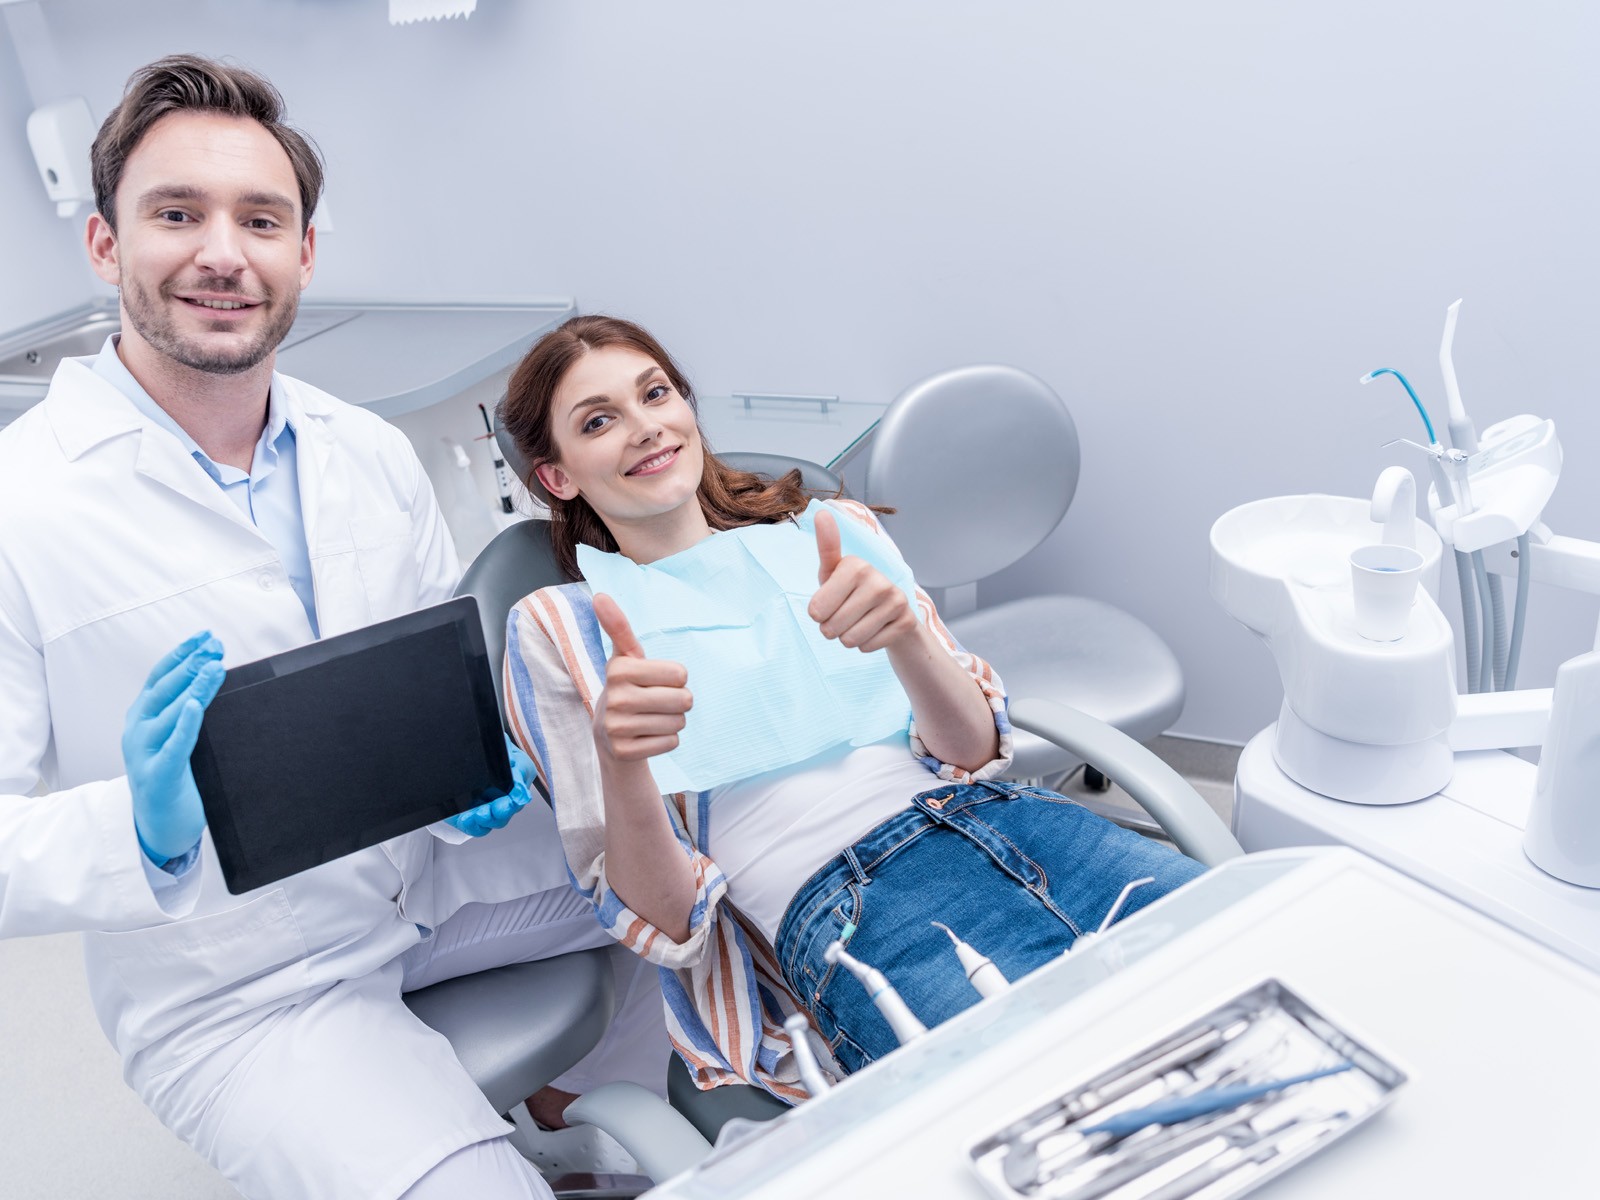 How To Overcome Dental Anxiety With Sedation Dentistry?